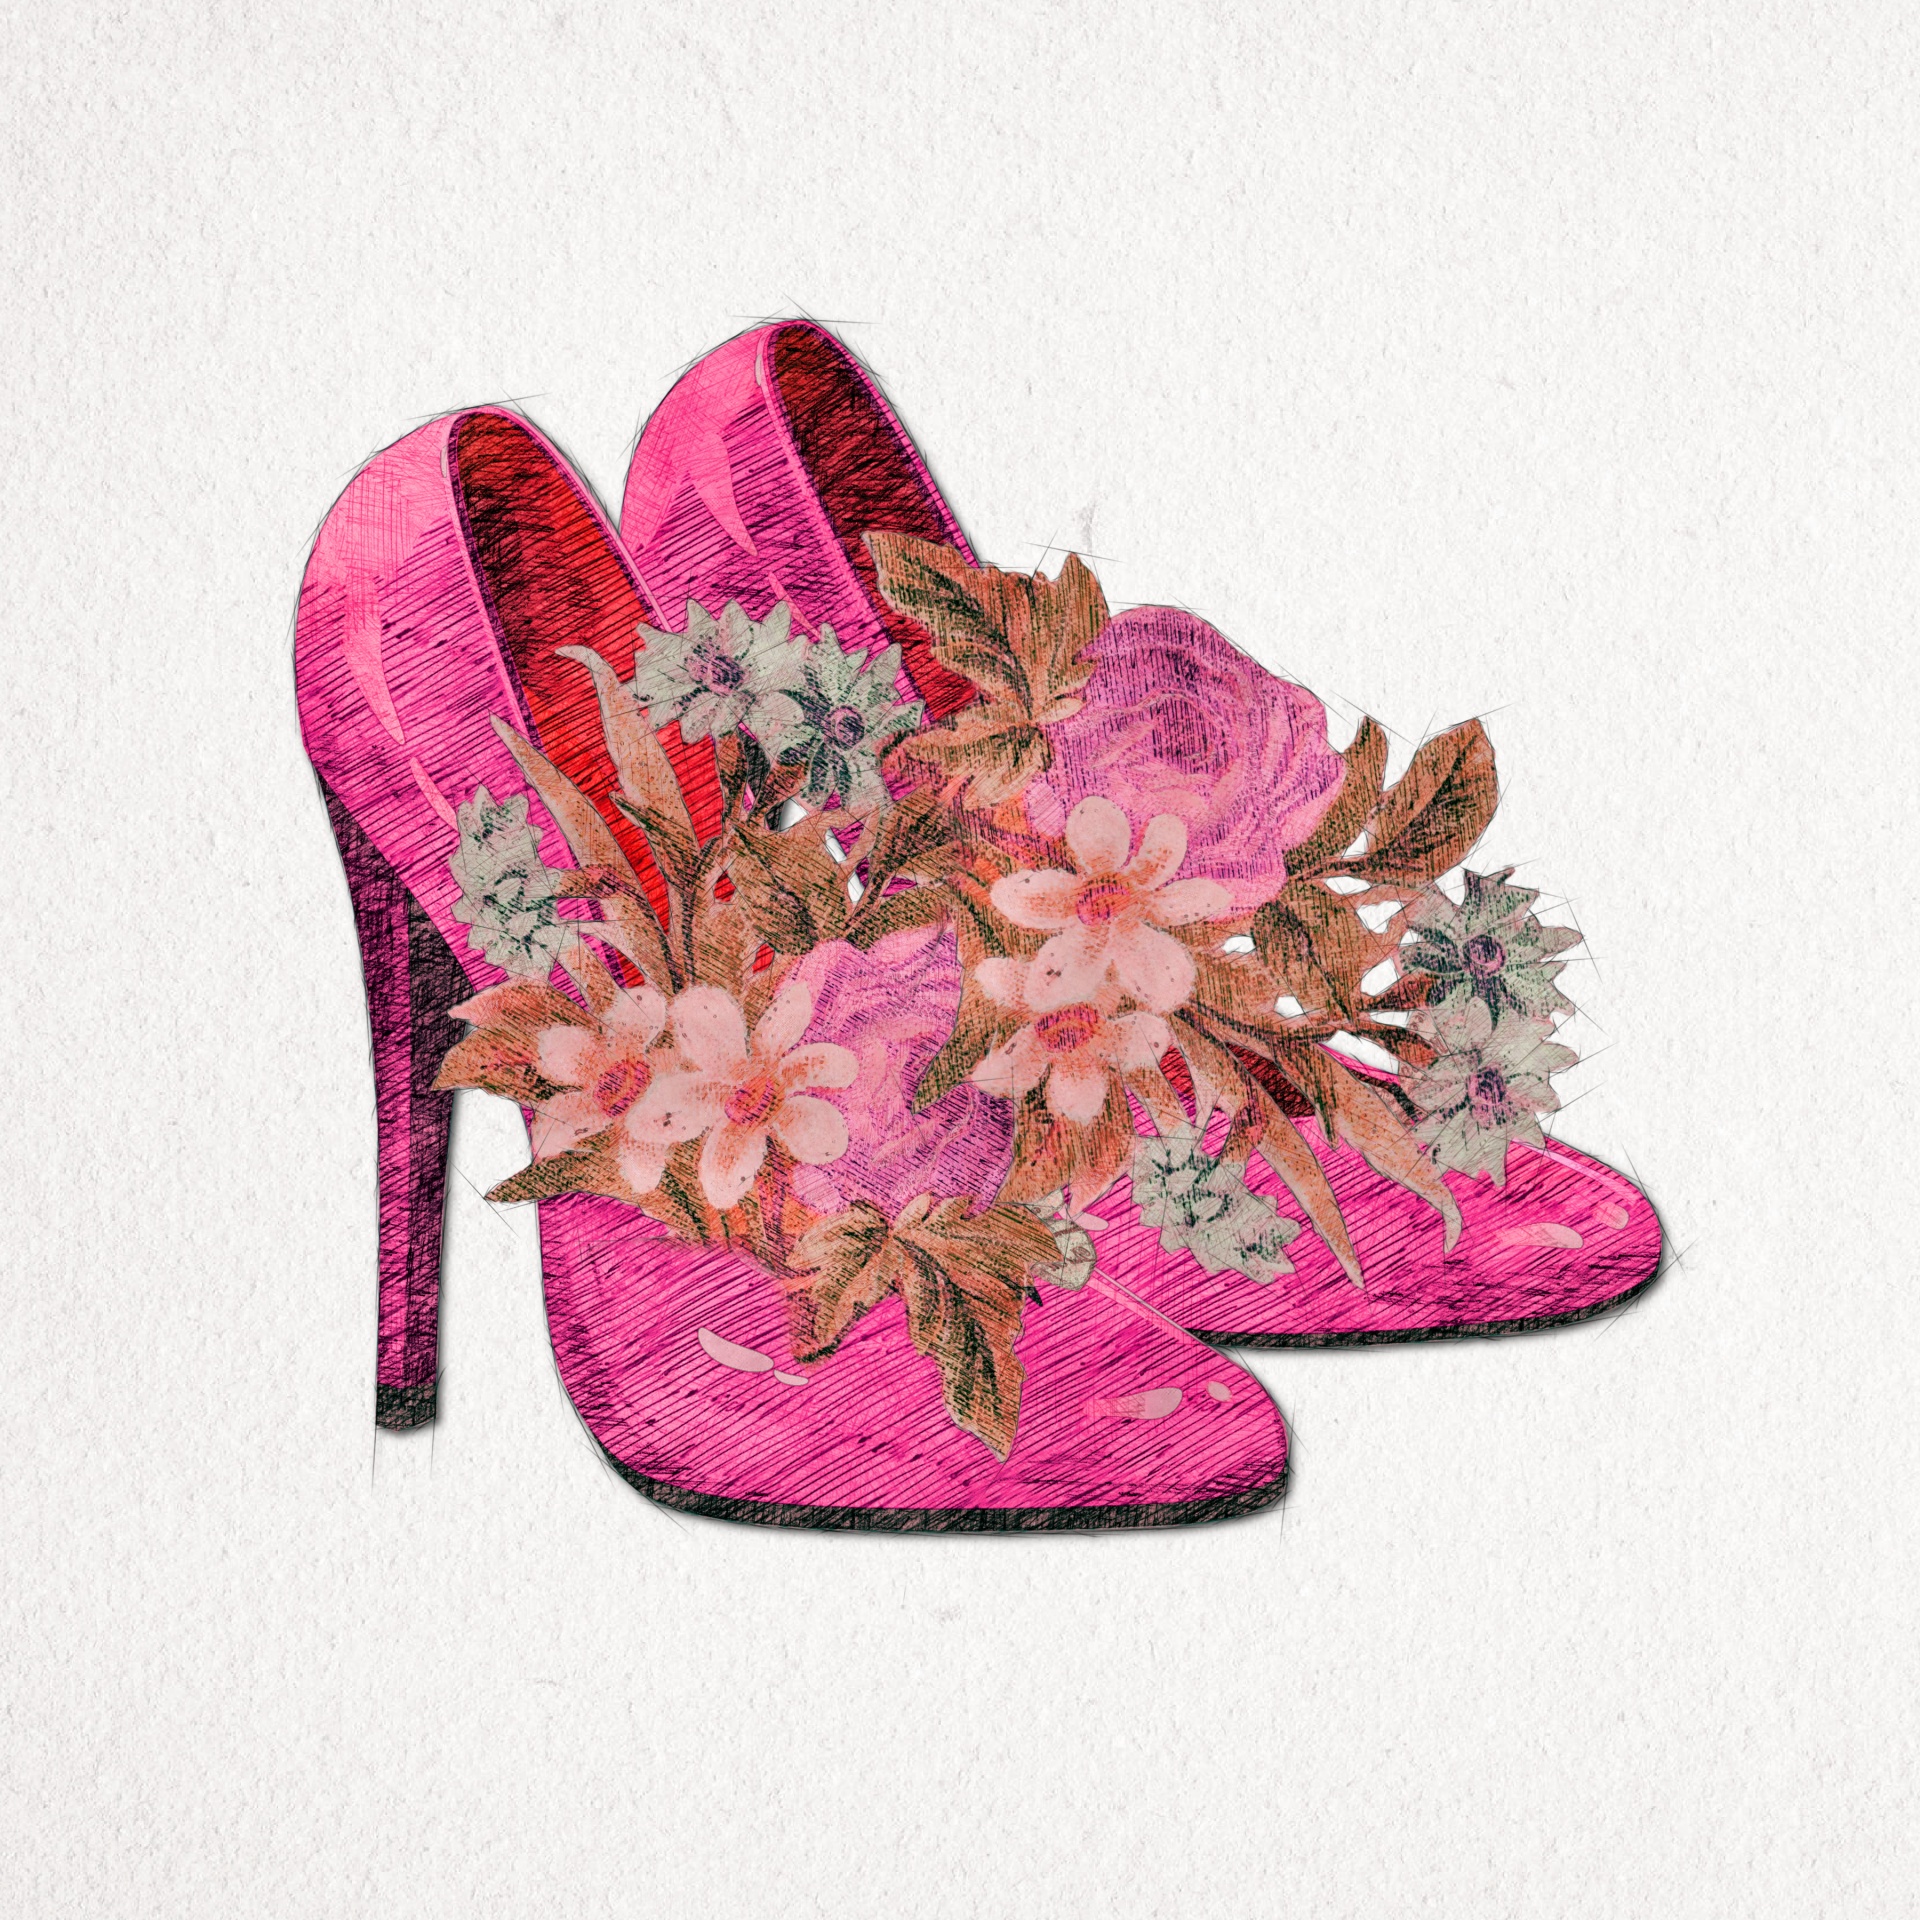 pair of high heel retro shoes with butterfly buttons filled with flowers